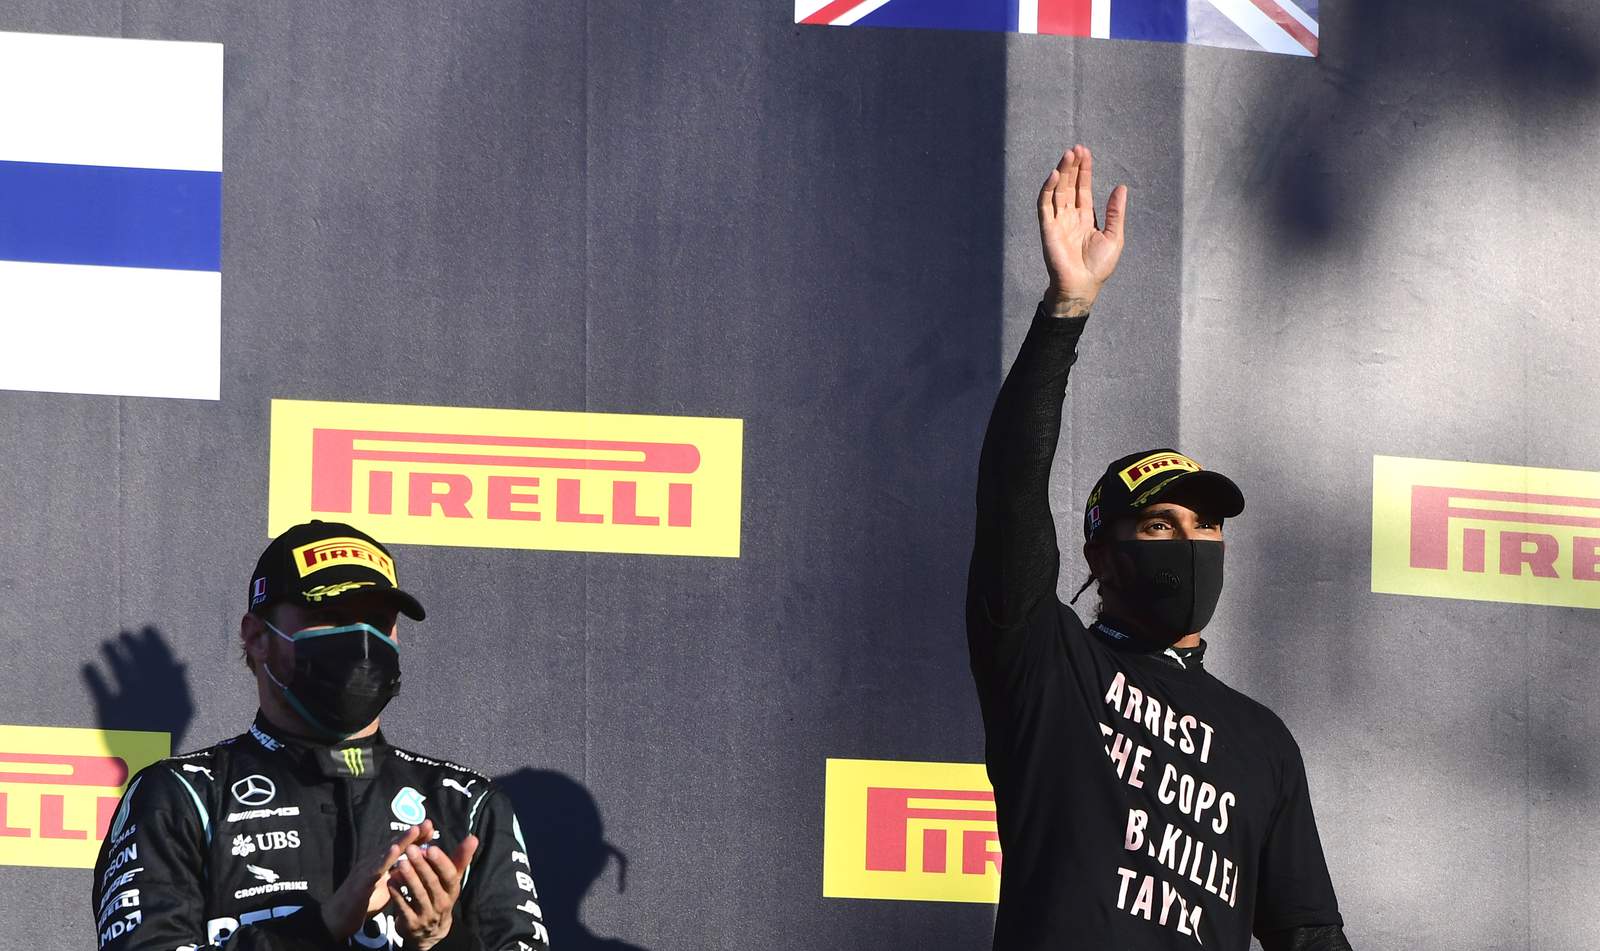 Hamilton wins hectic Tuscan GP, demands justice for Taylor